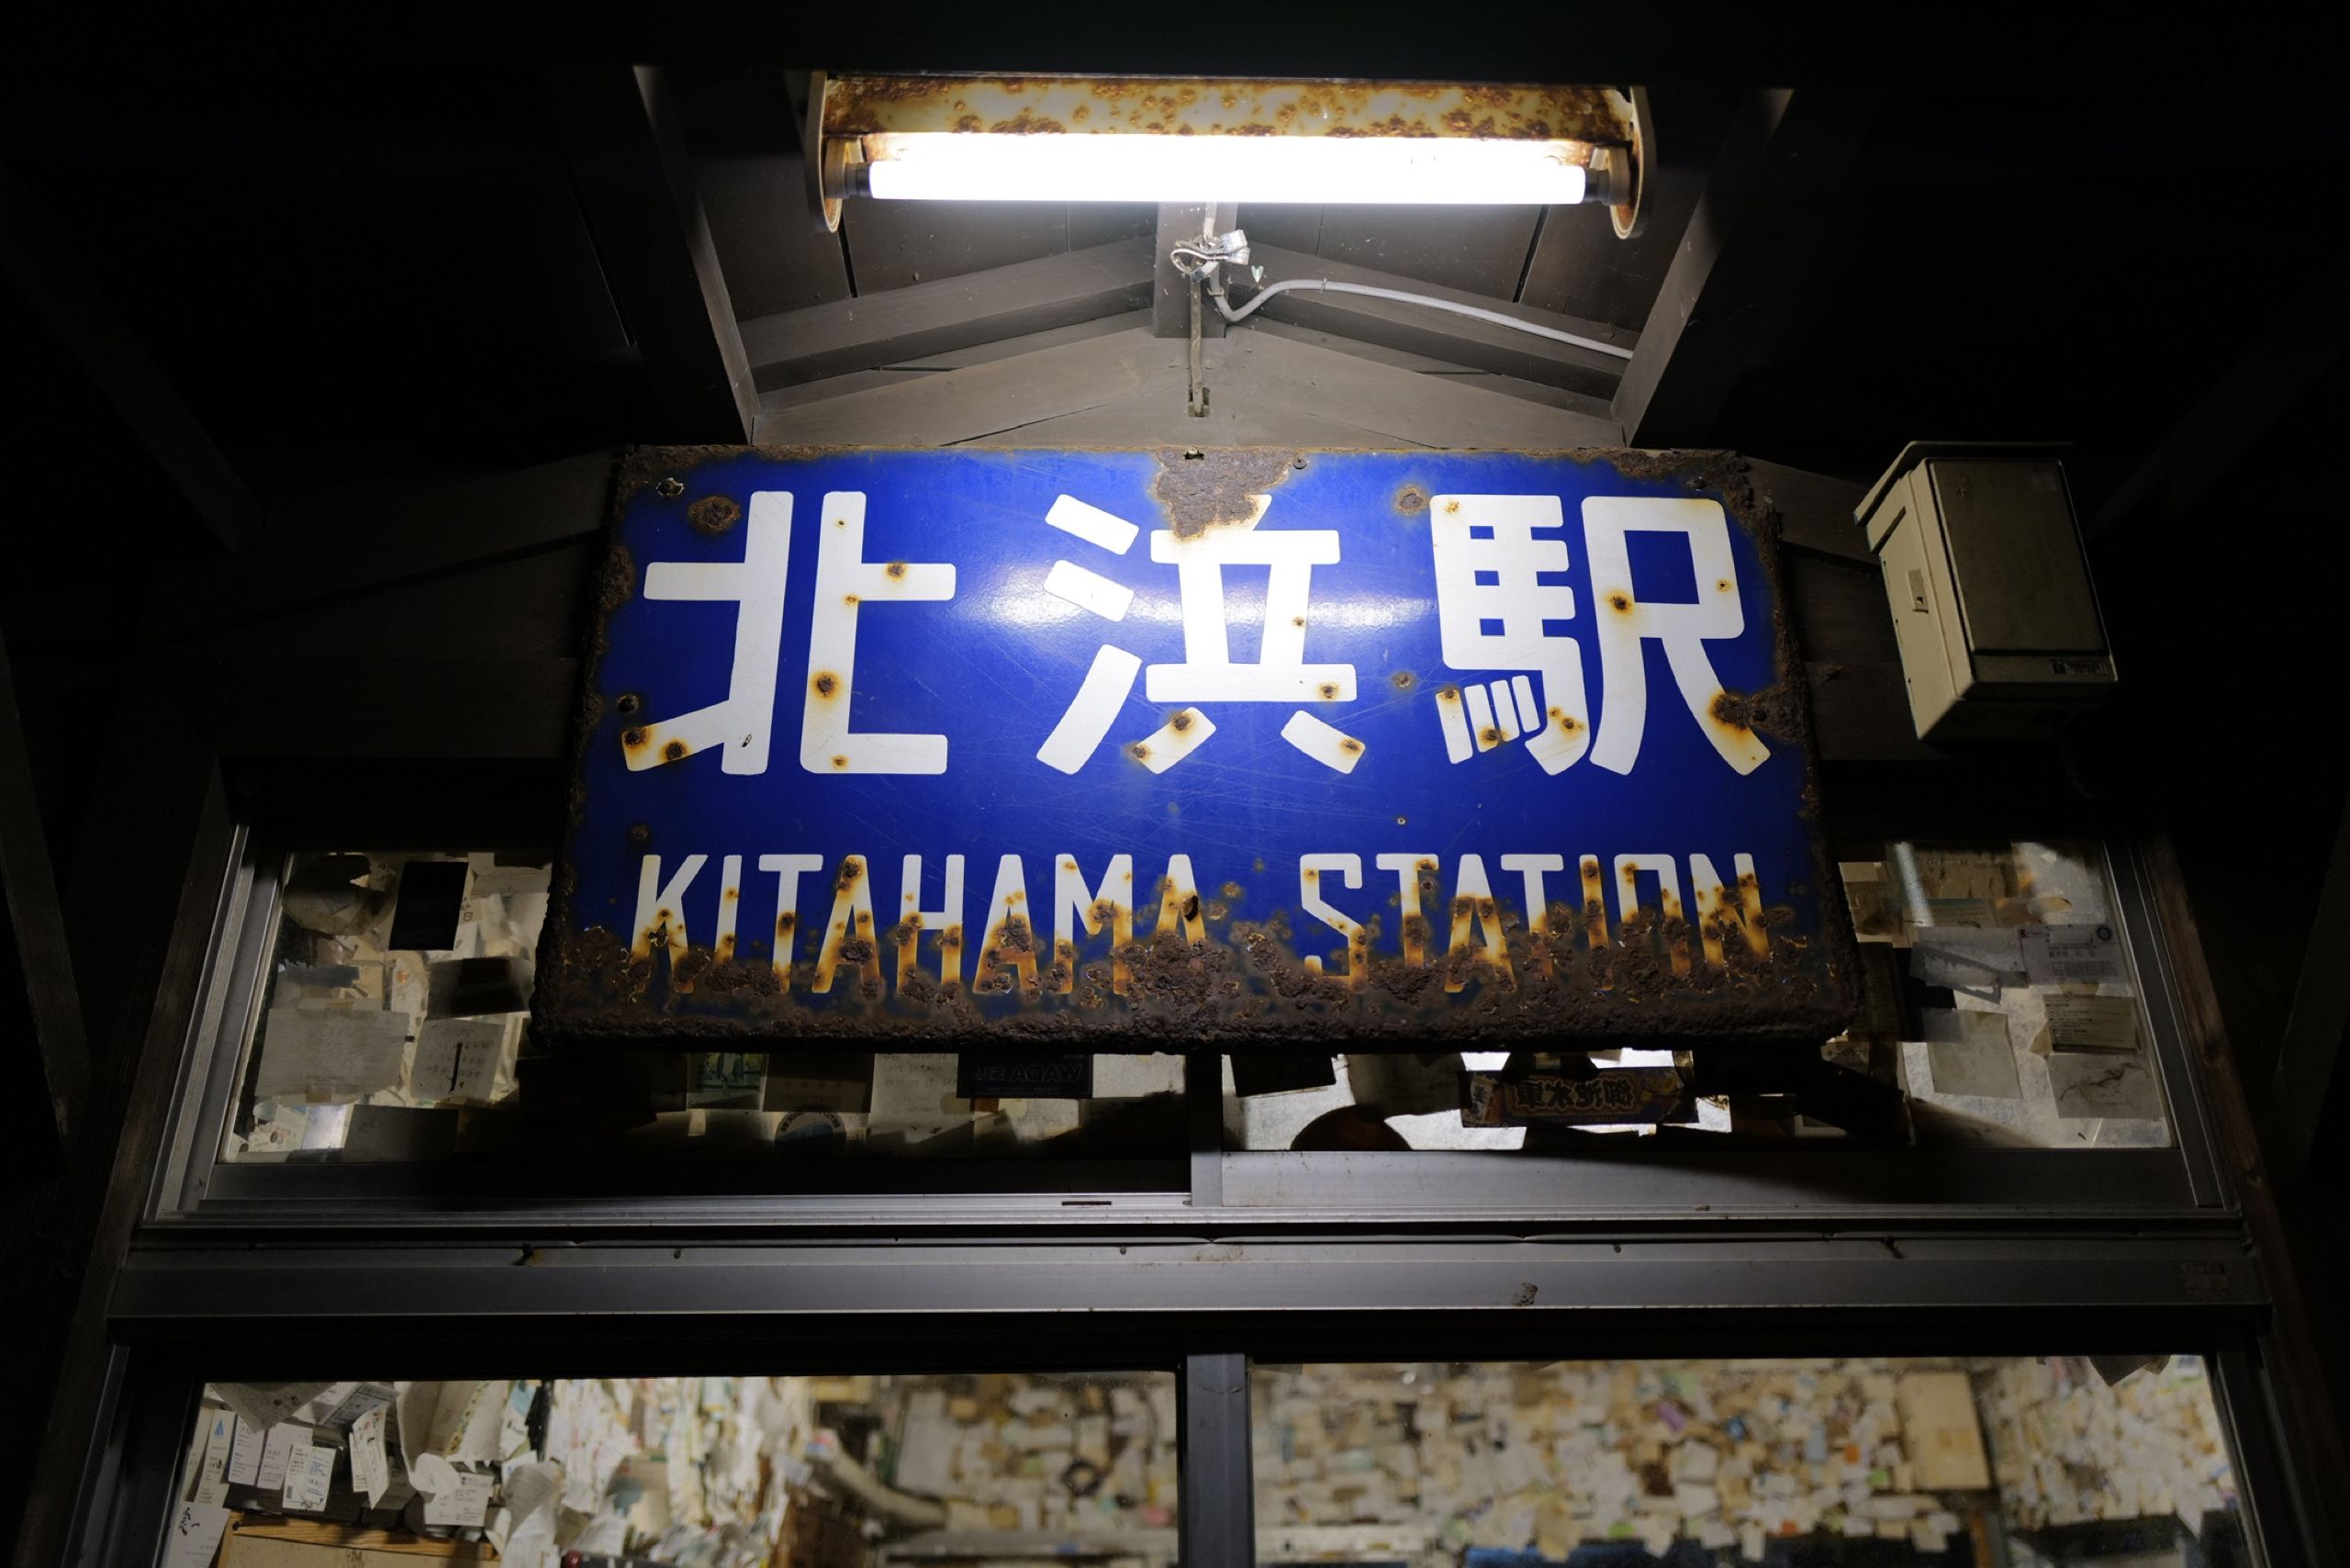 A rusty sign in the night says Kitahama Station